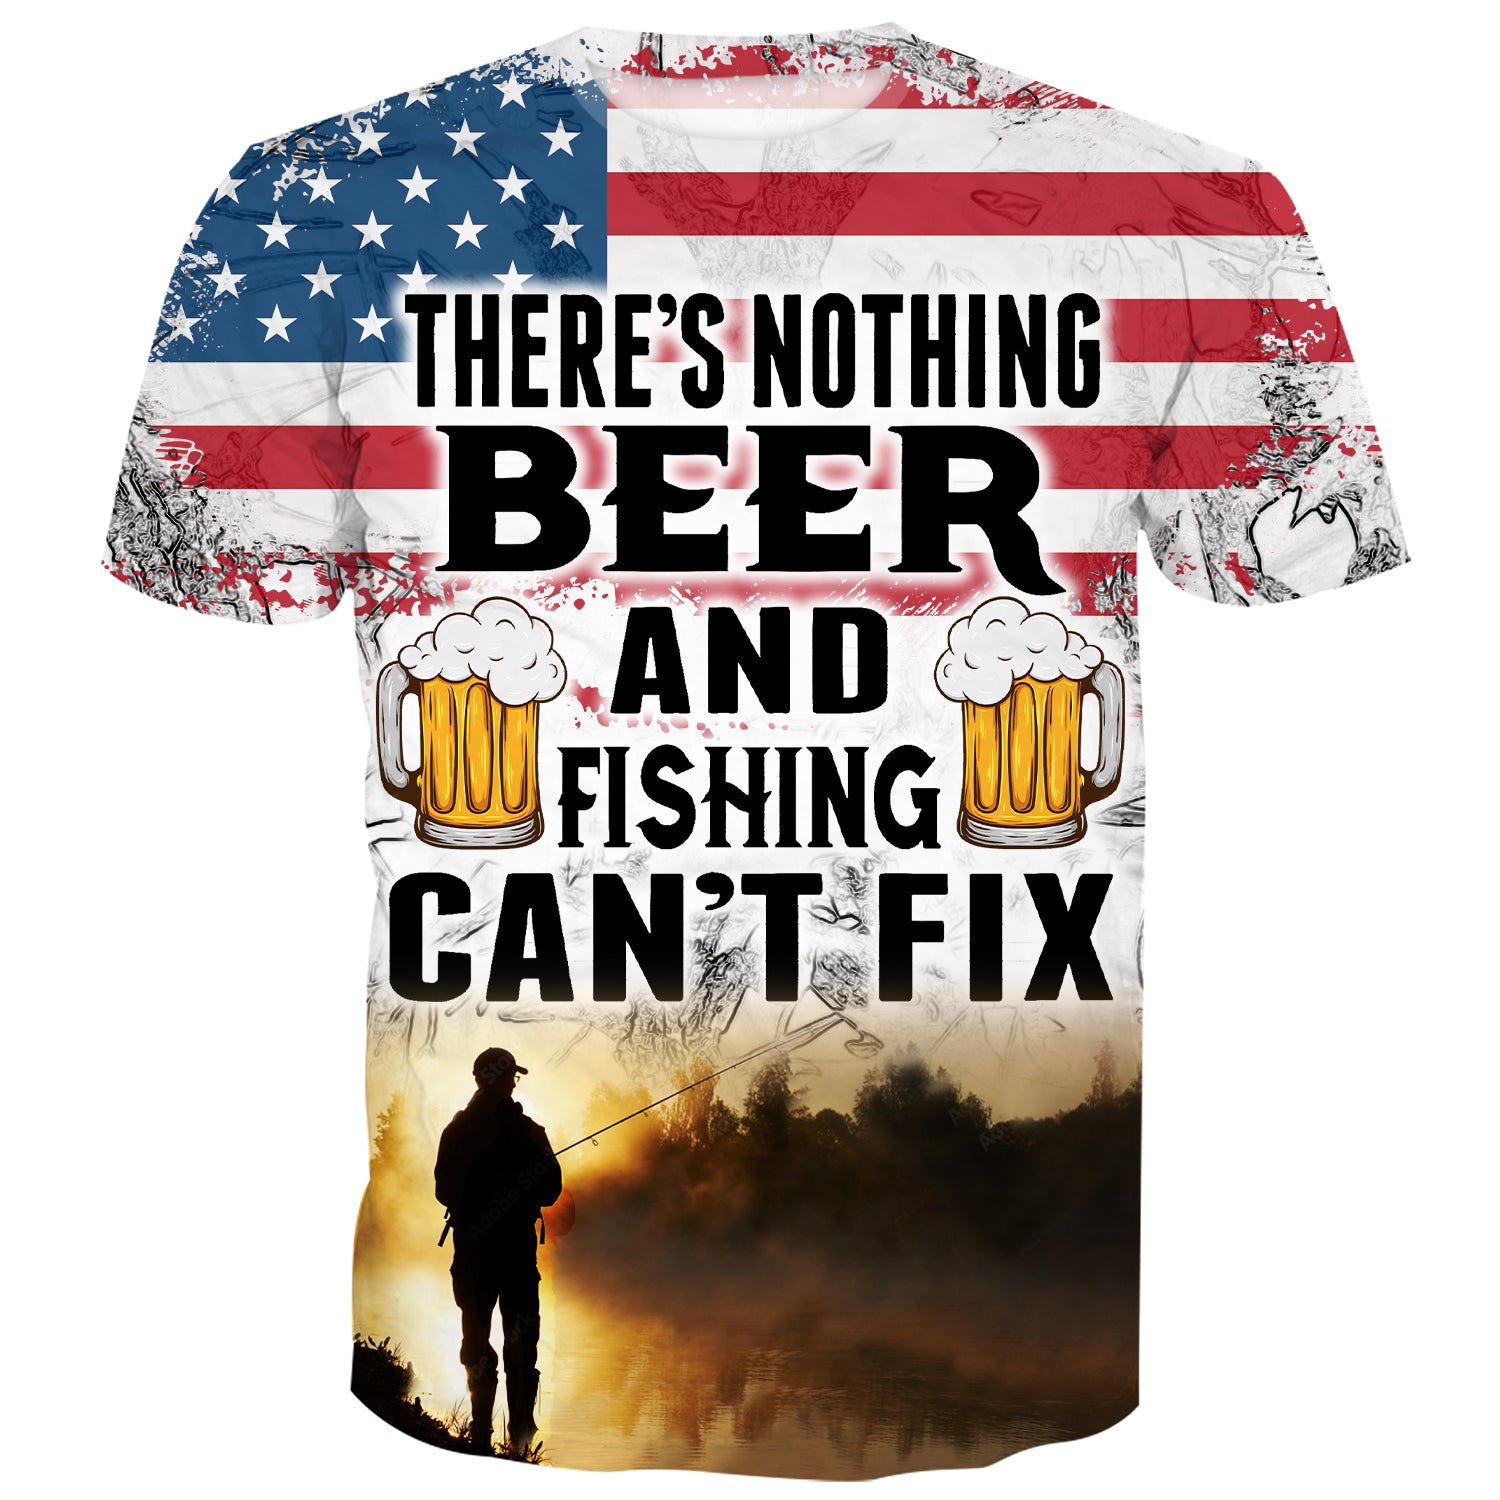 Fishing shirt with text There is nothing beer and fishing can't fix against the backdrop of U.S flag